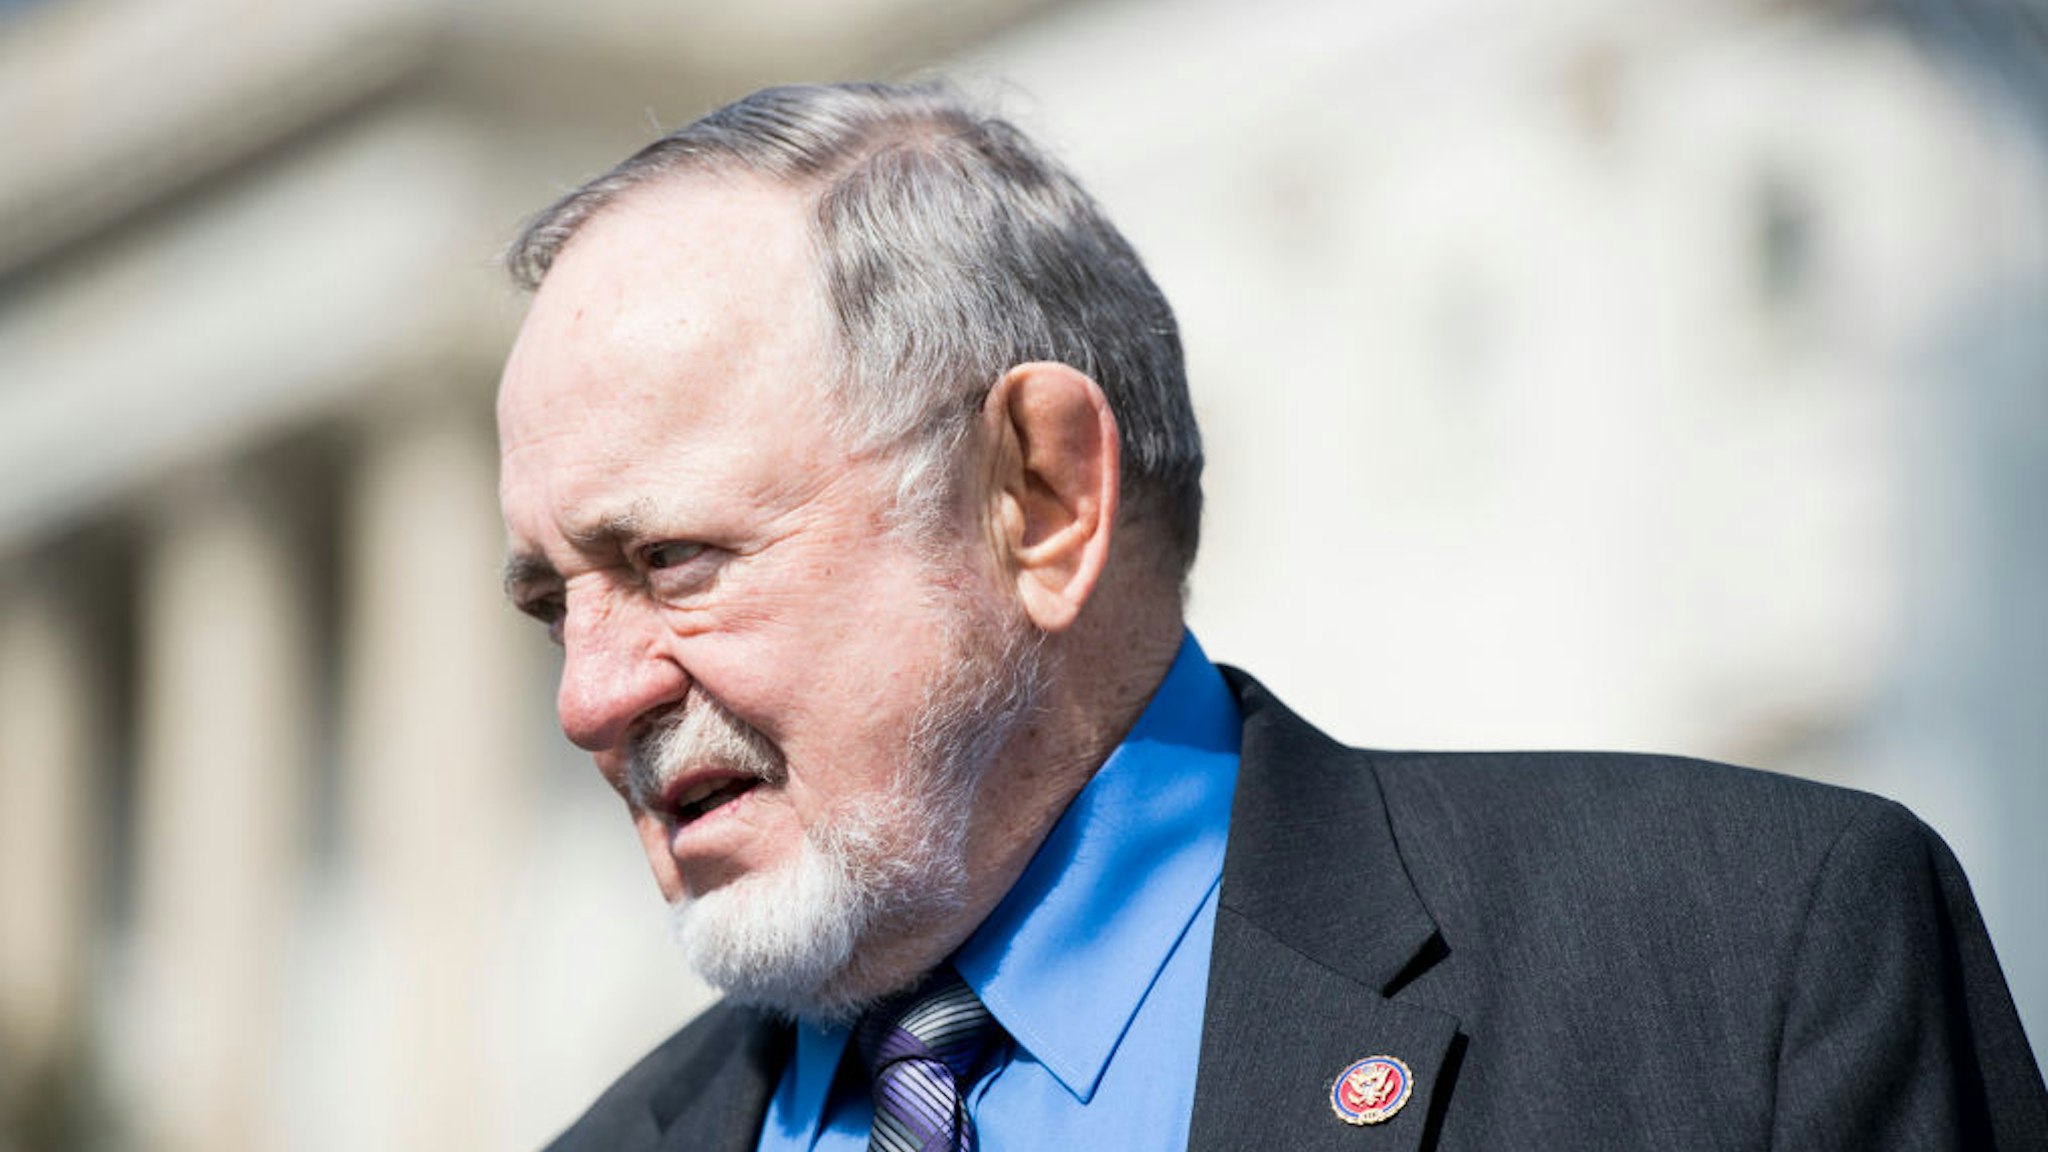 UNITED STATES - MARCH 7: Rep. Don Young, R-Alaska, arrives to hold a news conference with Rep. Tulsi Gabbard, D-Hawaii, outside of the Capitol to discuss the introduction of two bipartisan marijuana bills on Thursday, March 7, 2019.